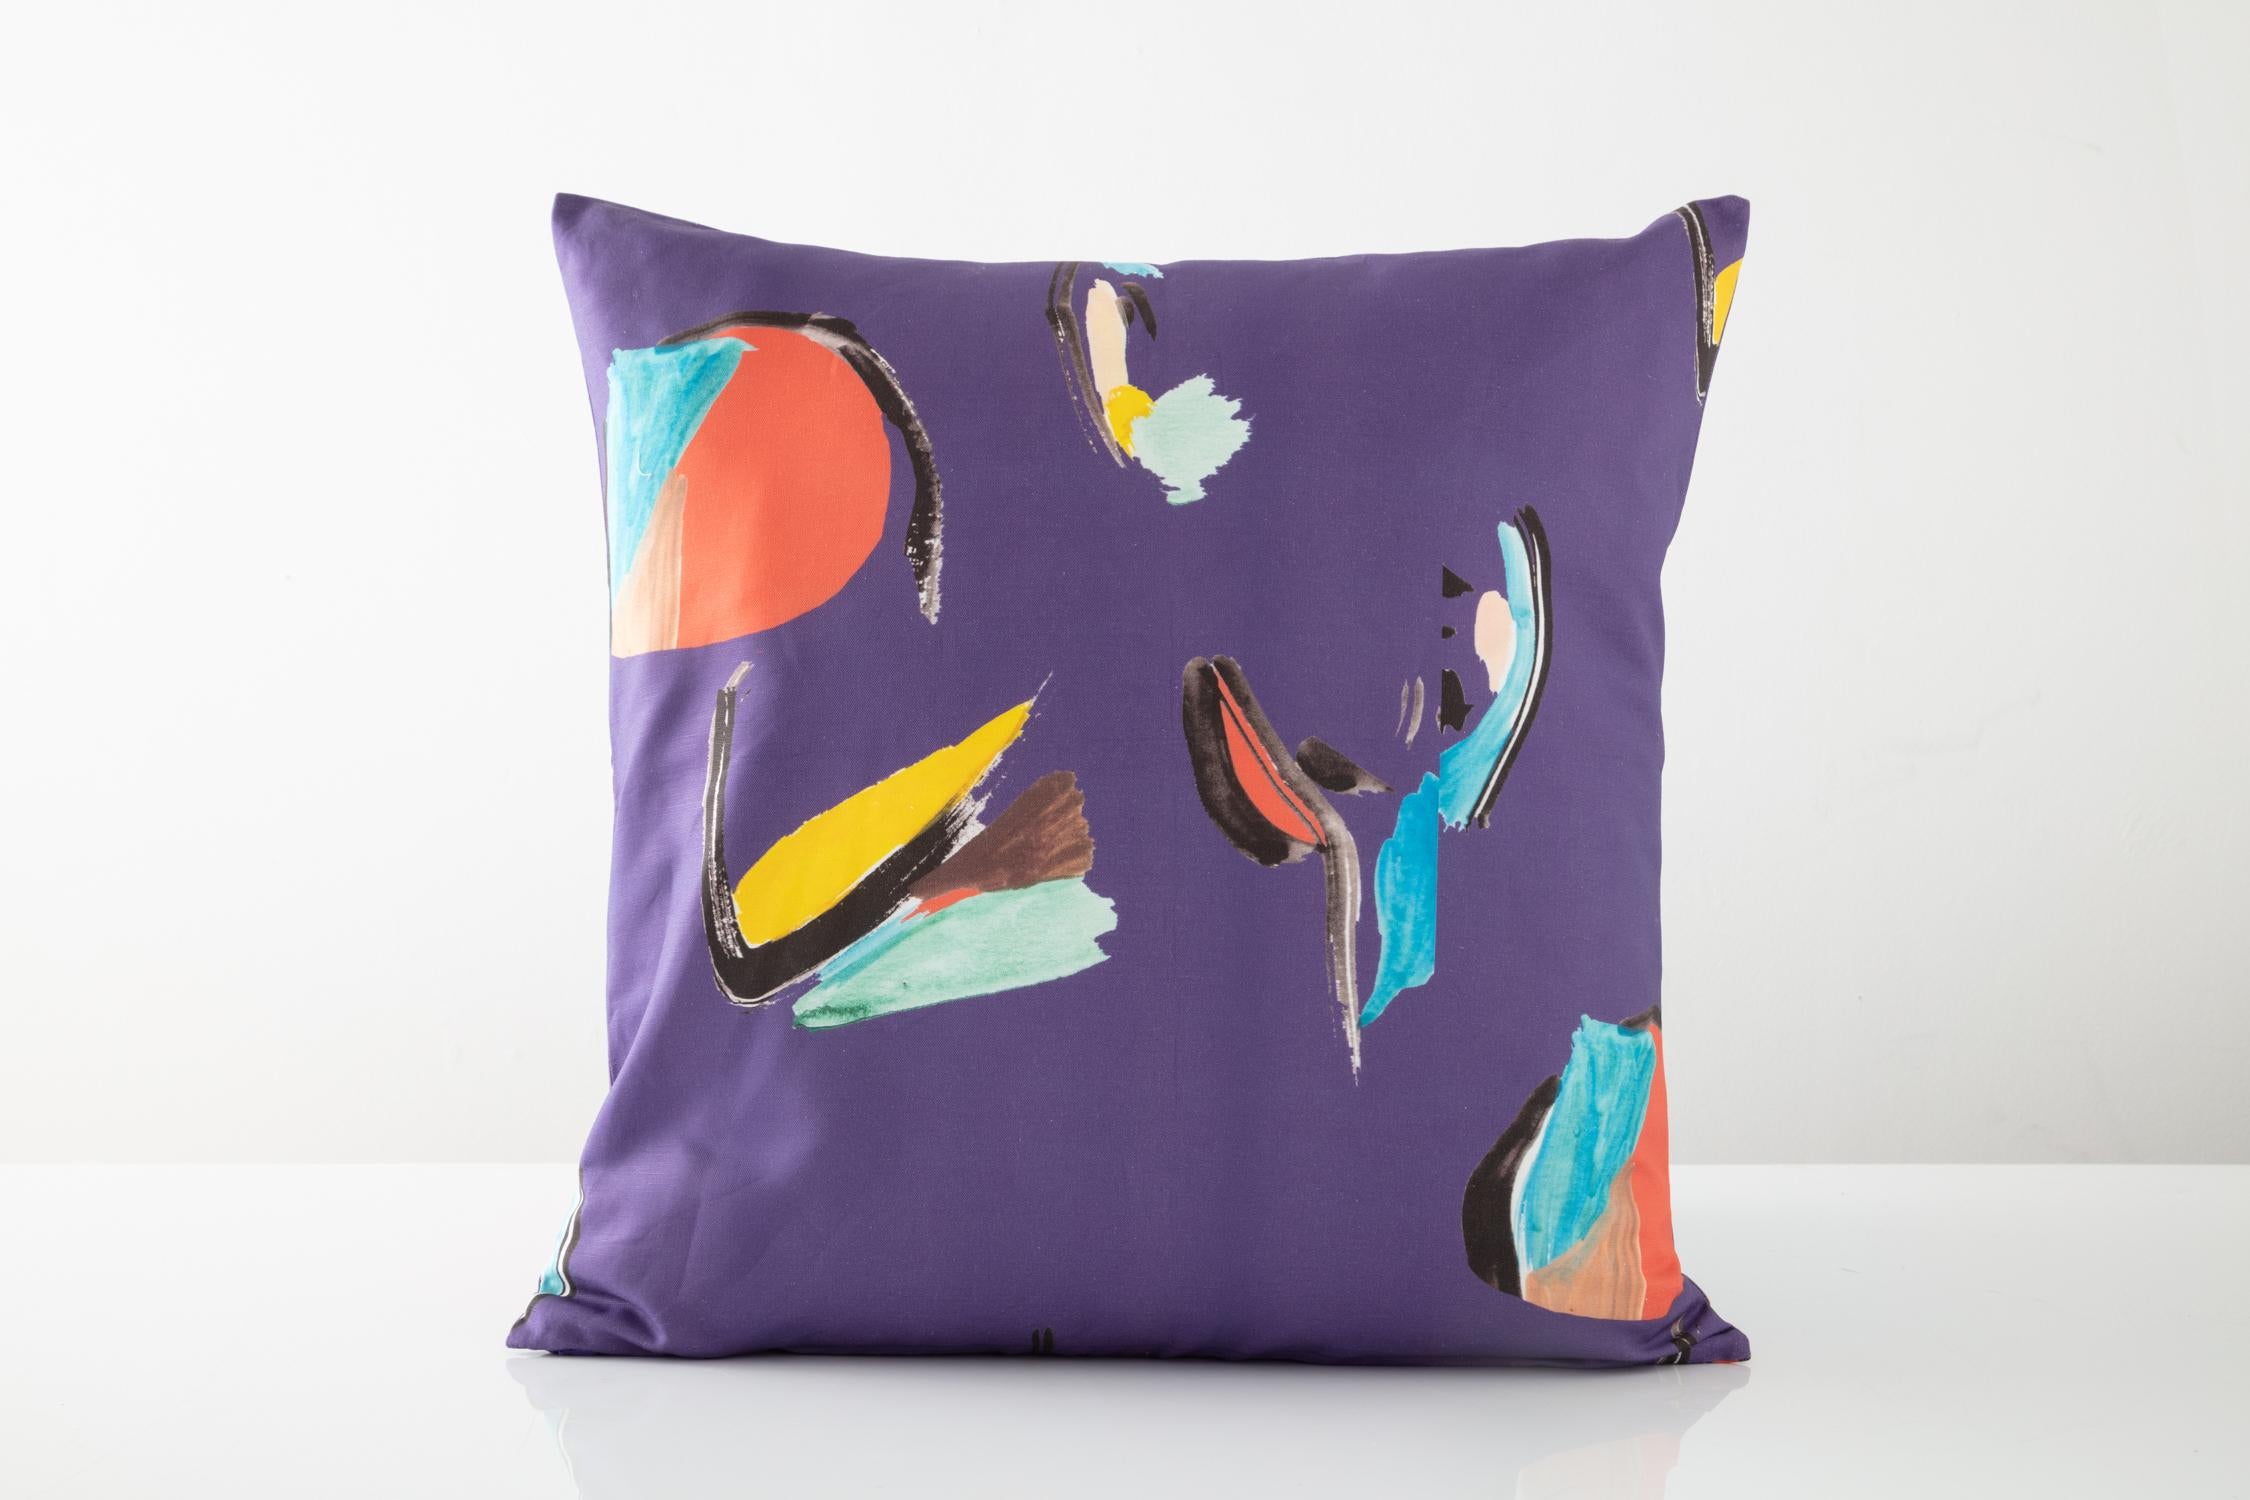 The Purple Pod Square Pillow is digitally printed with an original watercolor painting by Naomi Clark. Every piece out of Clark's abstract and richly colored print collection for Fort Makers adds beauty, art and comfort to the home.

Materials: